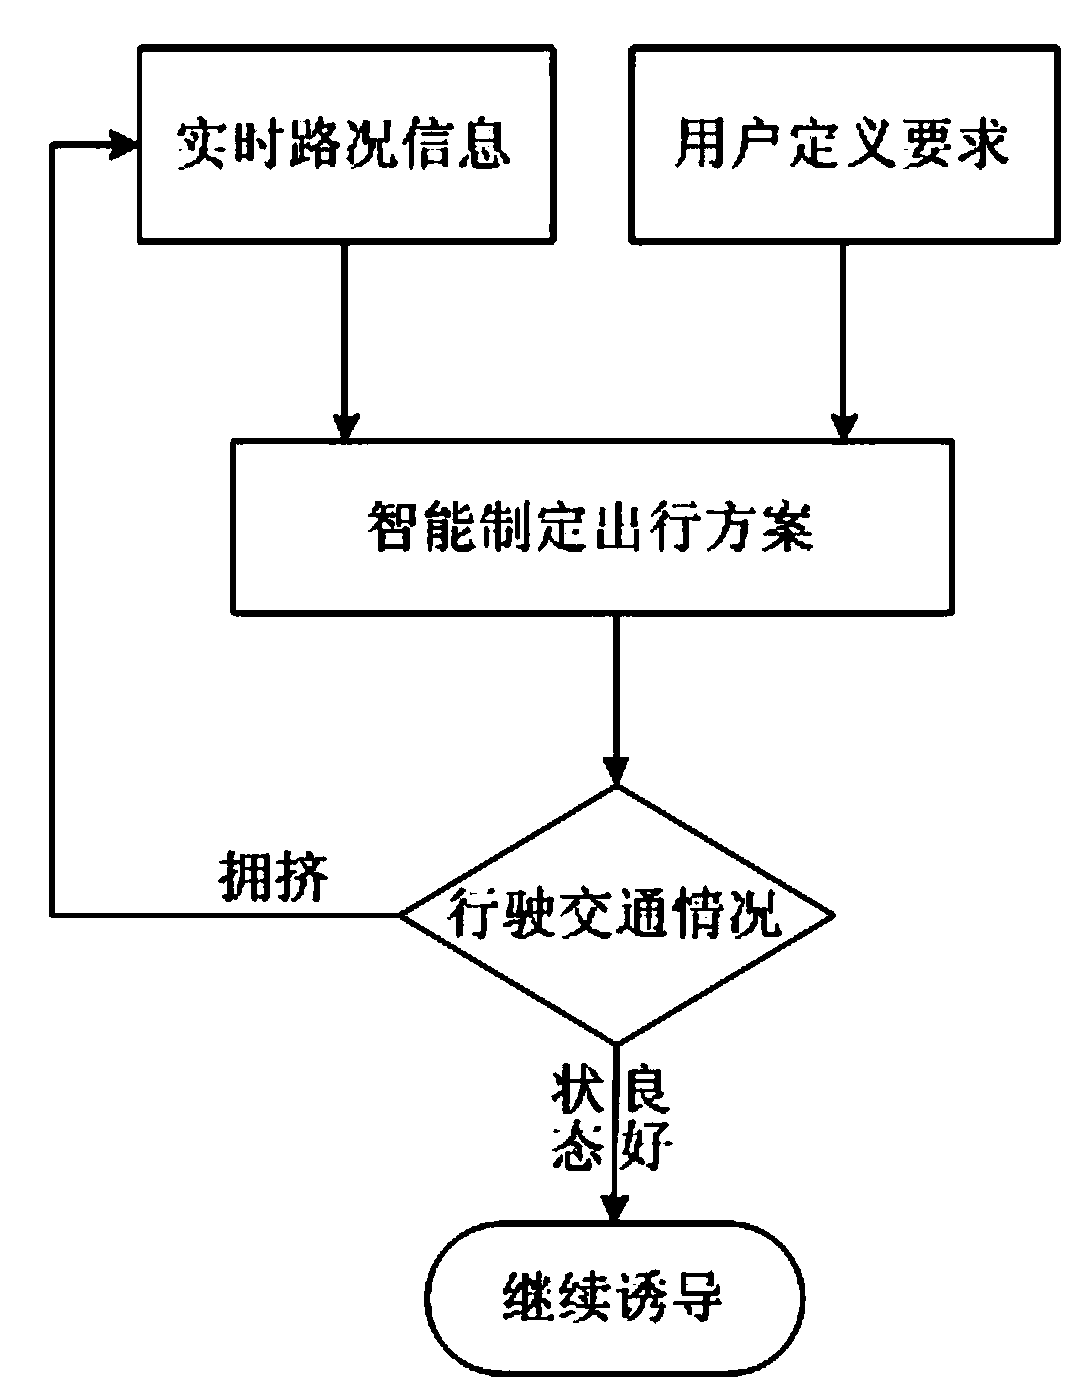 Road traffic guiding method and system